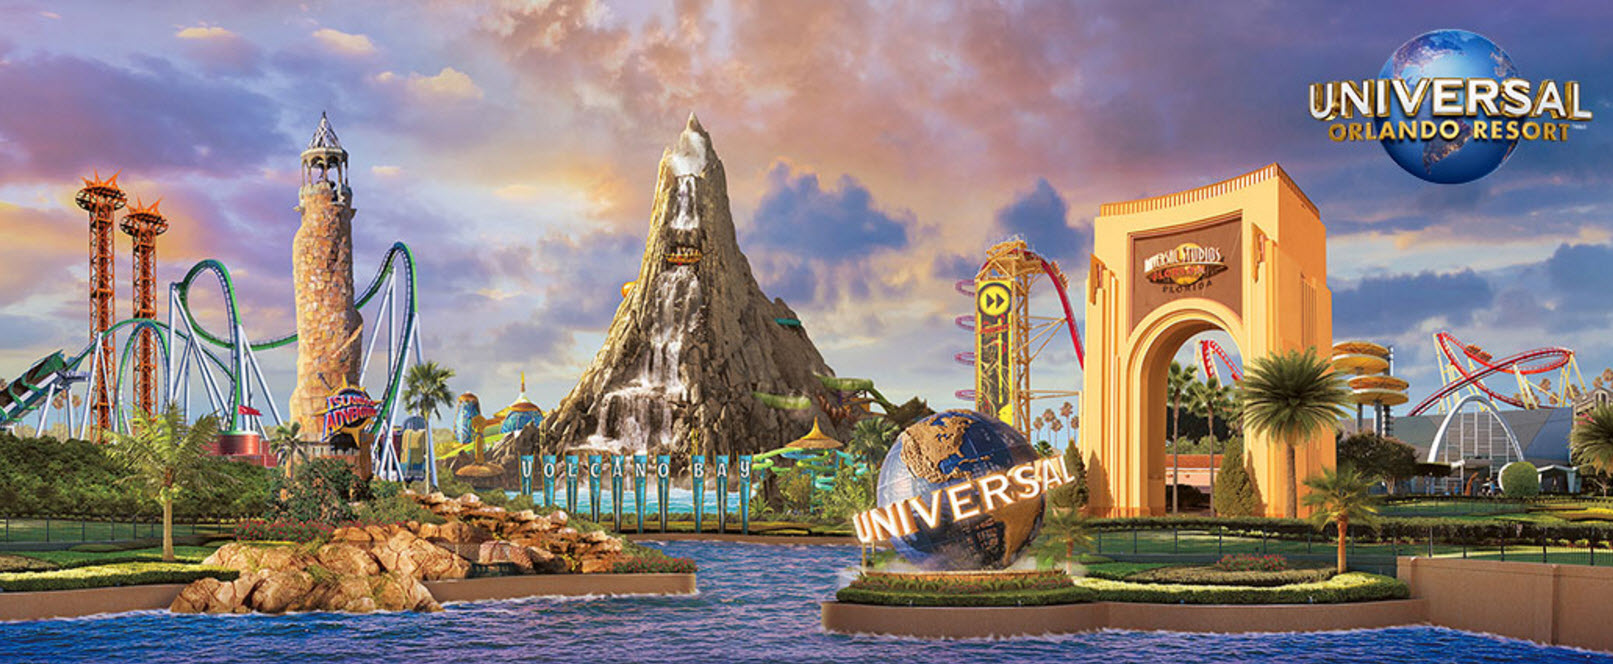 You could win a trip for two to Universal Orlando Resort from EXTRA TV Plus, attend the Grand Opening of Universal's Volcano Bay water theme park. Grab today's word of the day to enter for your chance to win.